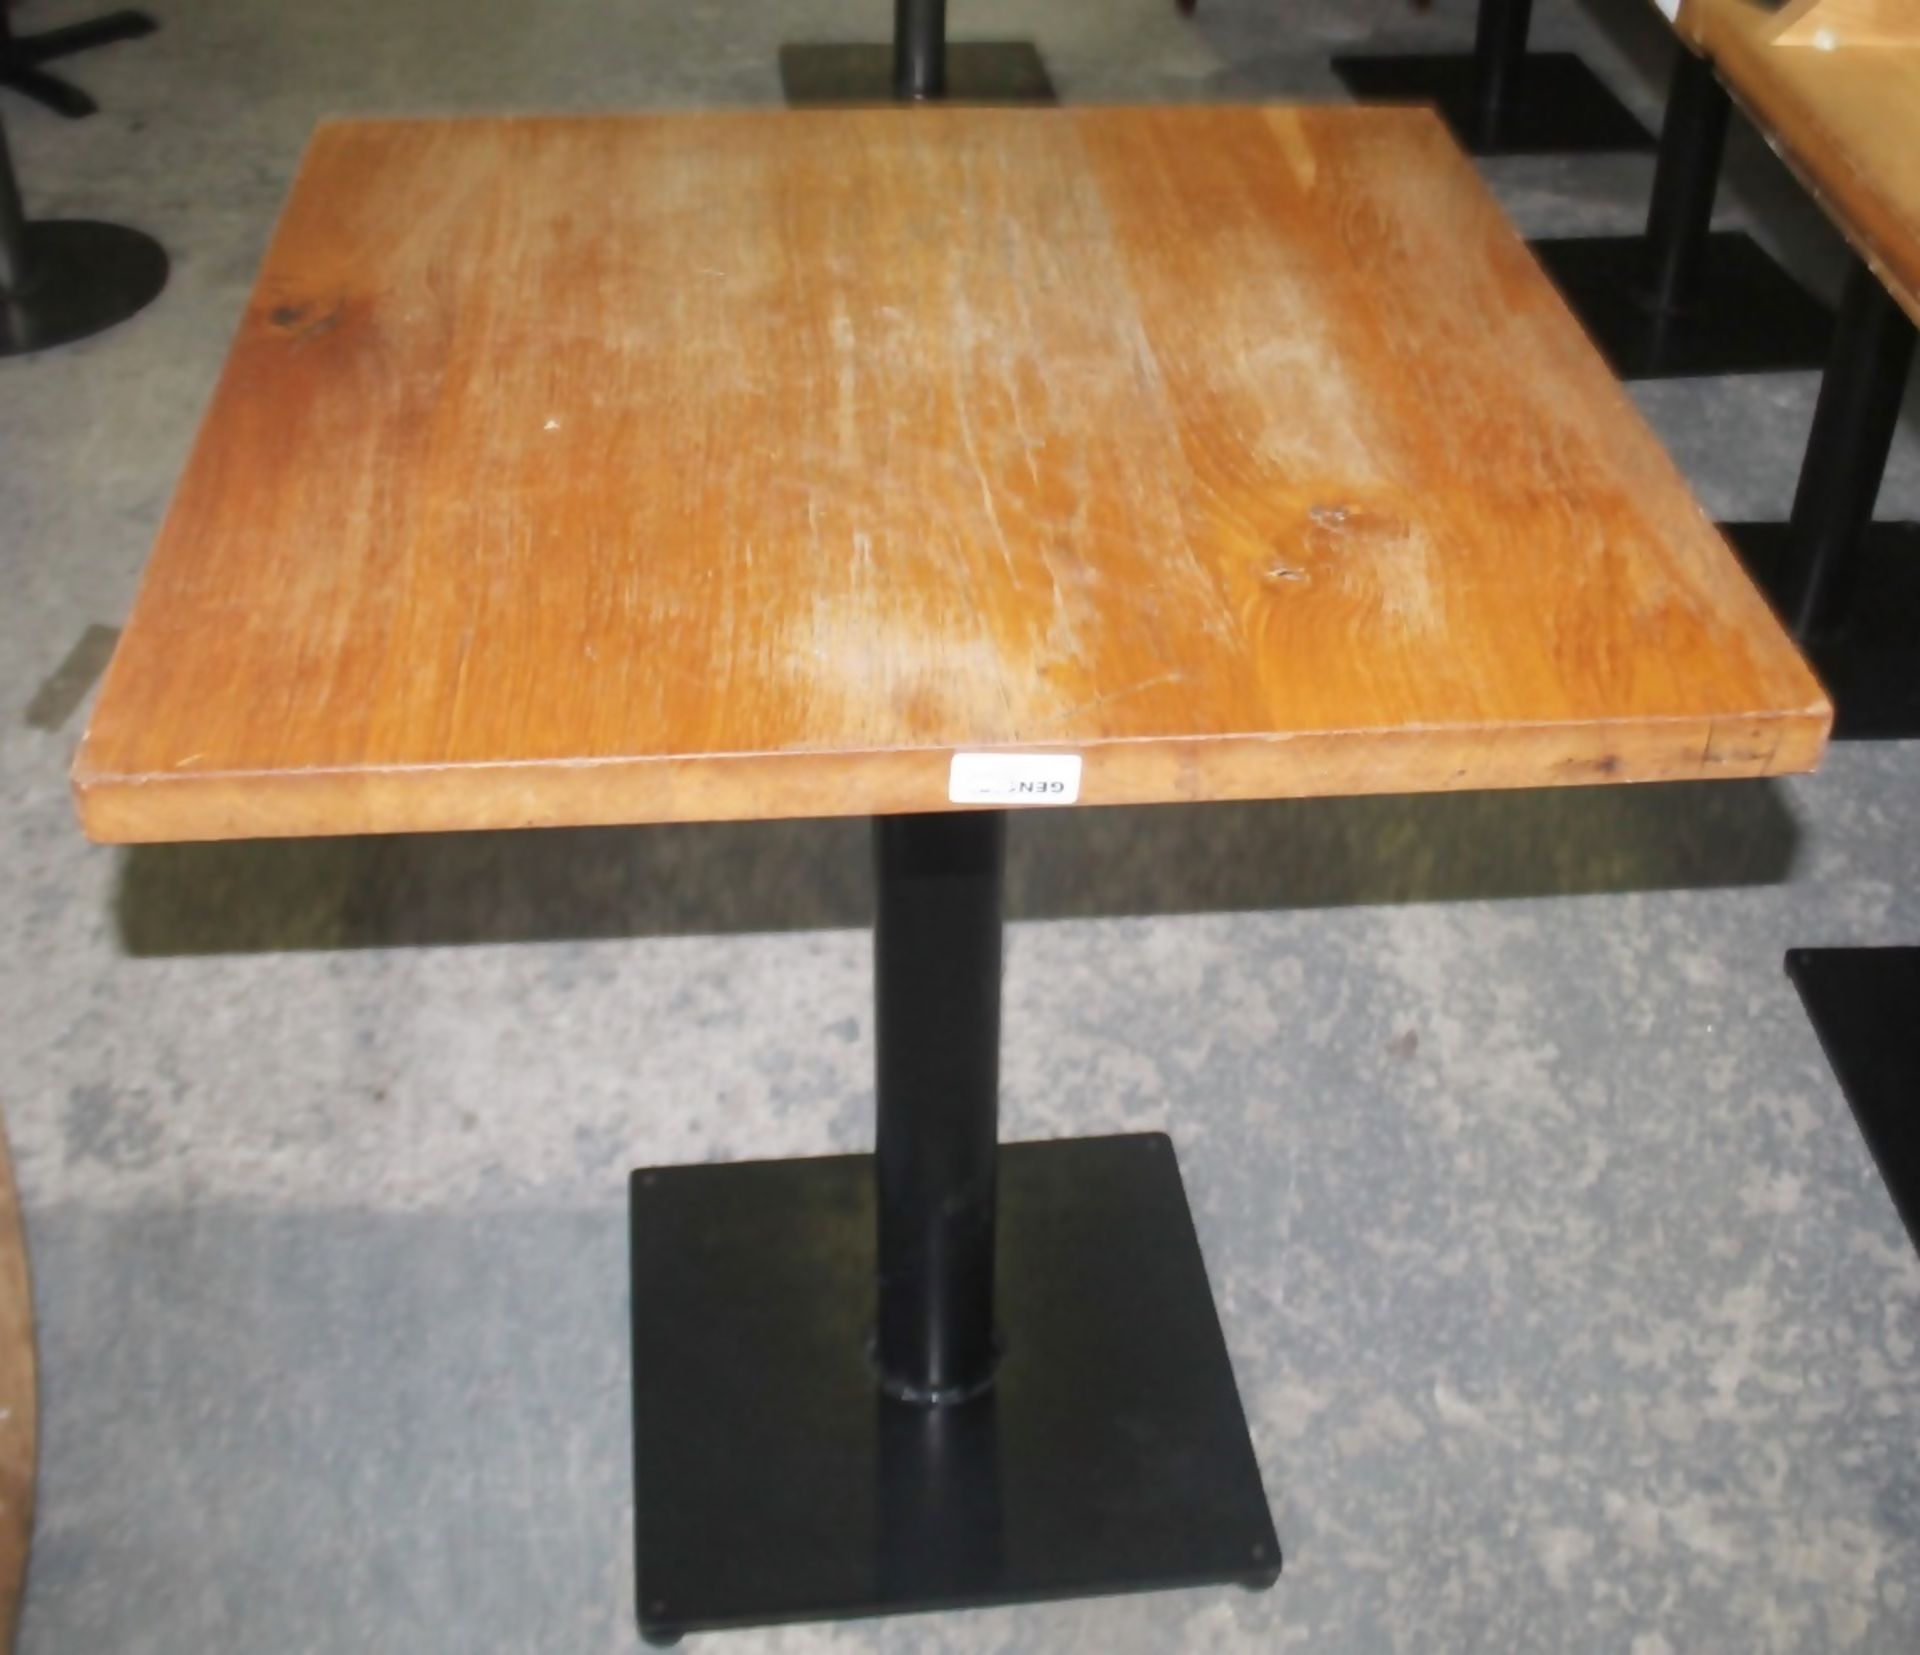 8 x Solid Oak Restaurant Dining Tables - Natural Rustic Knotty Oak Tops With Black Cast Iron Bases - - Image 8 of 8